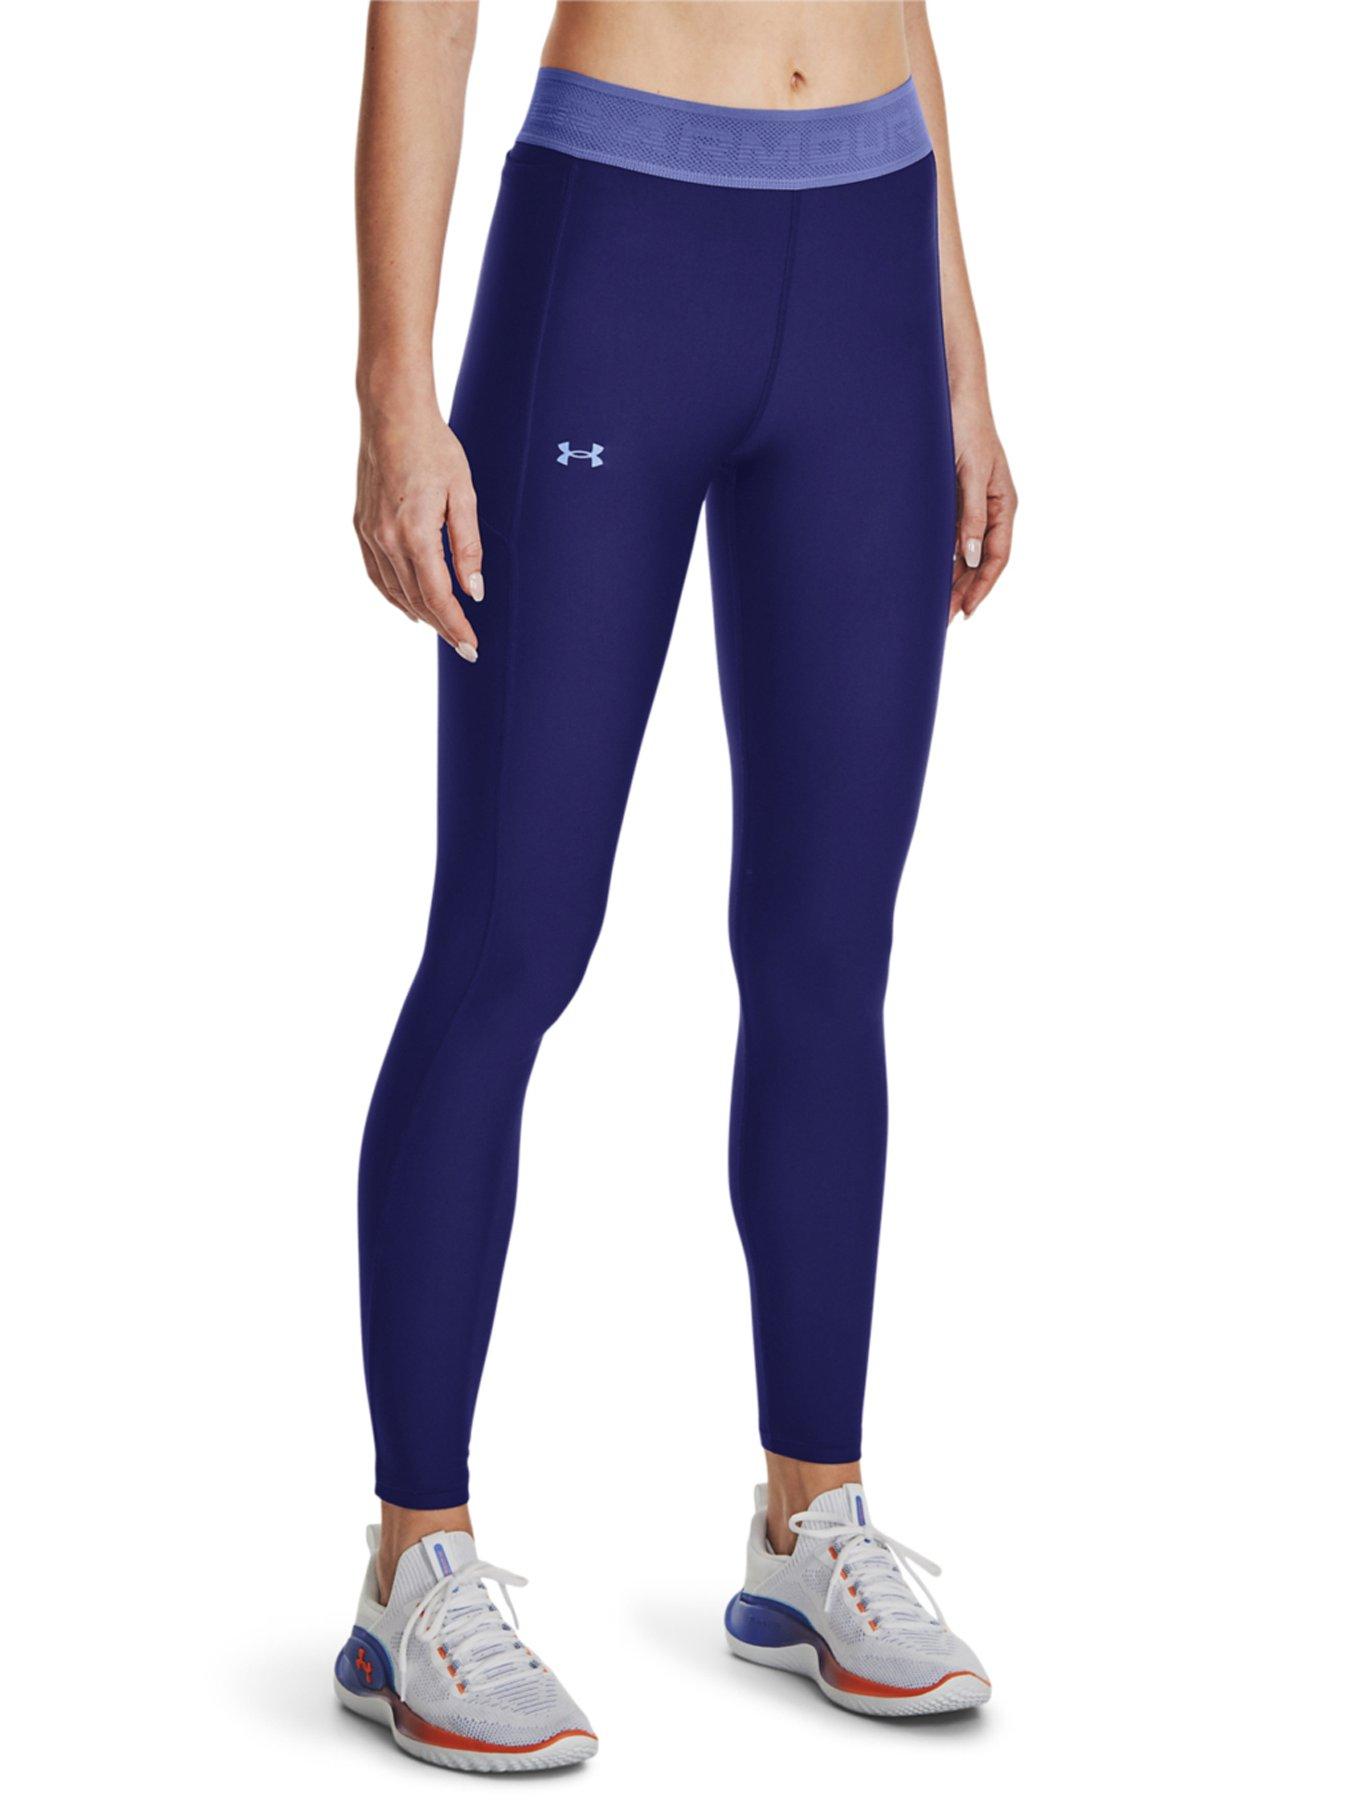 Rit dye on fast and free leggings. From Grey to Navy! : r/lululemon